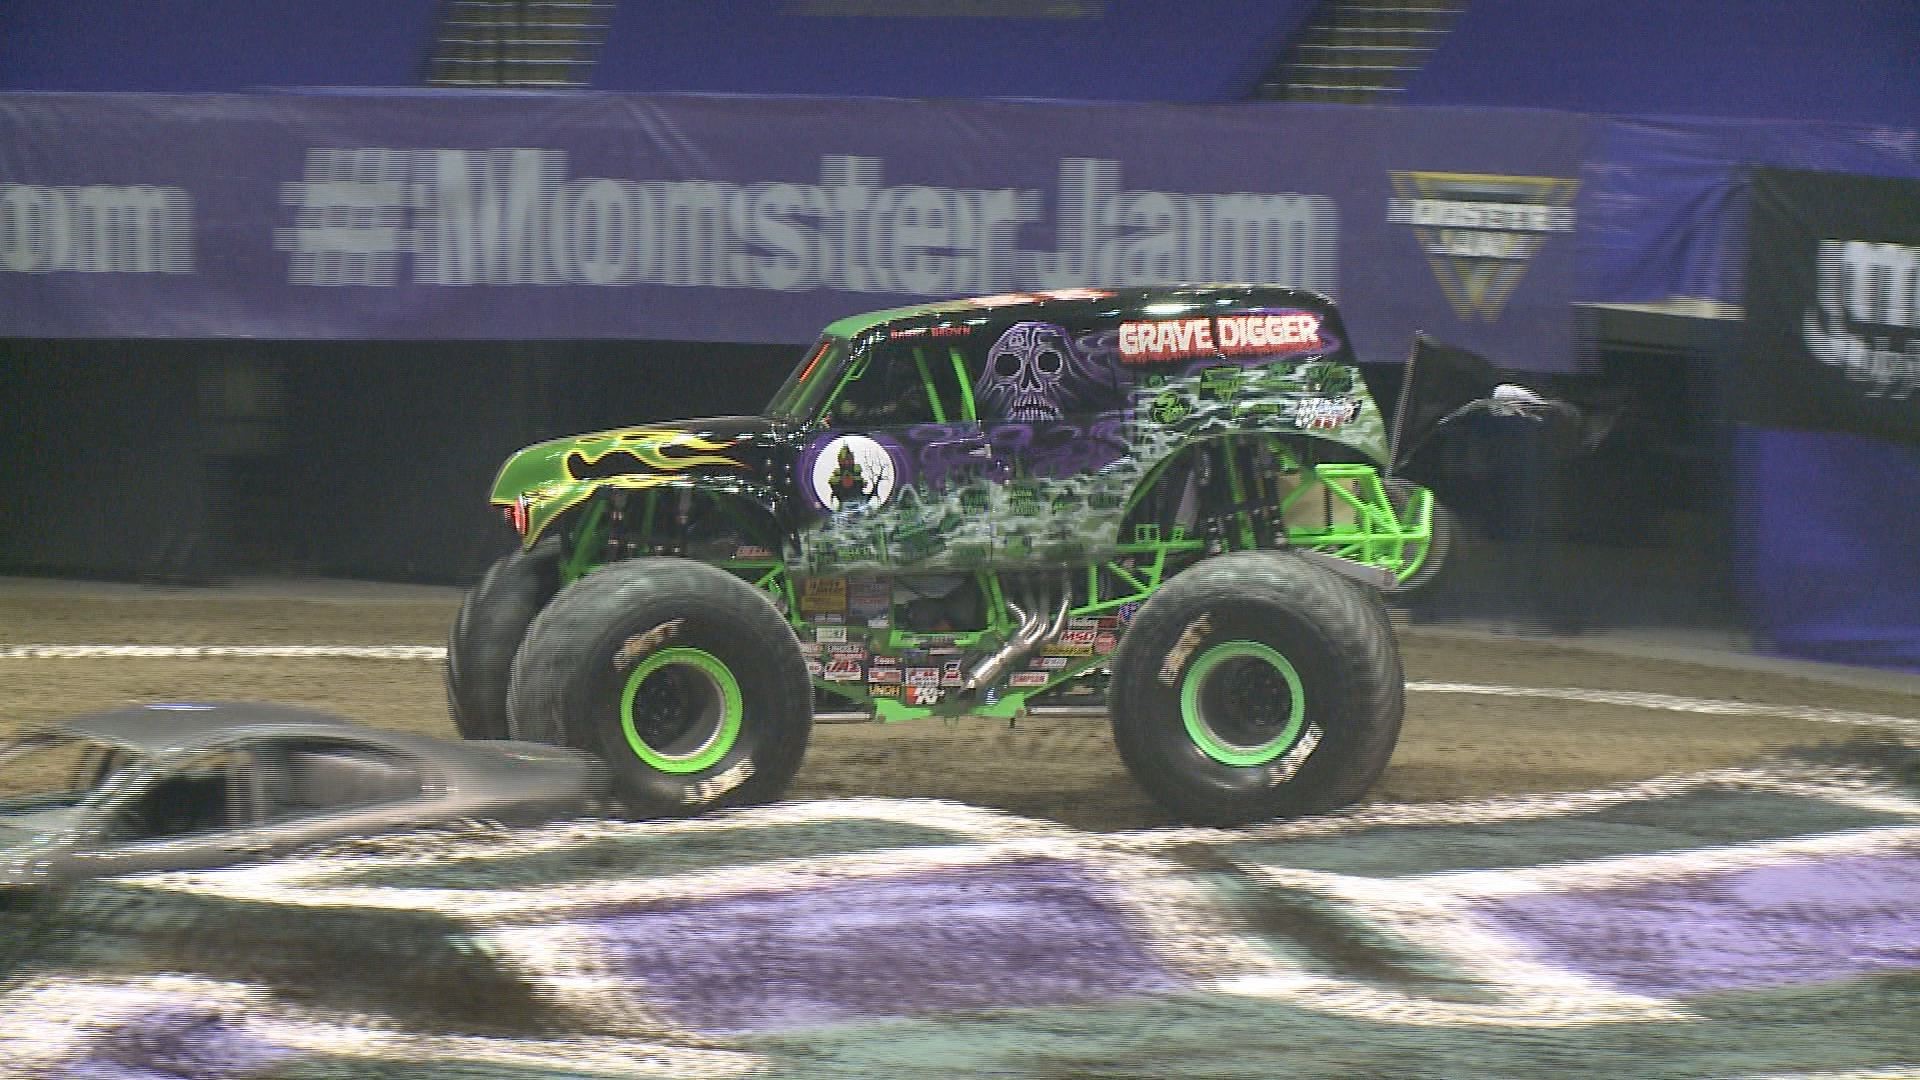 Big names like the Grave Digger, Pretty Wicked and Monster Mutt Dalmatian are among the trucks that will be on hand.